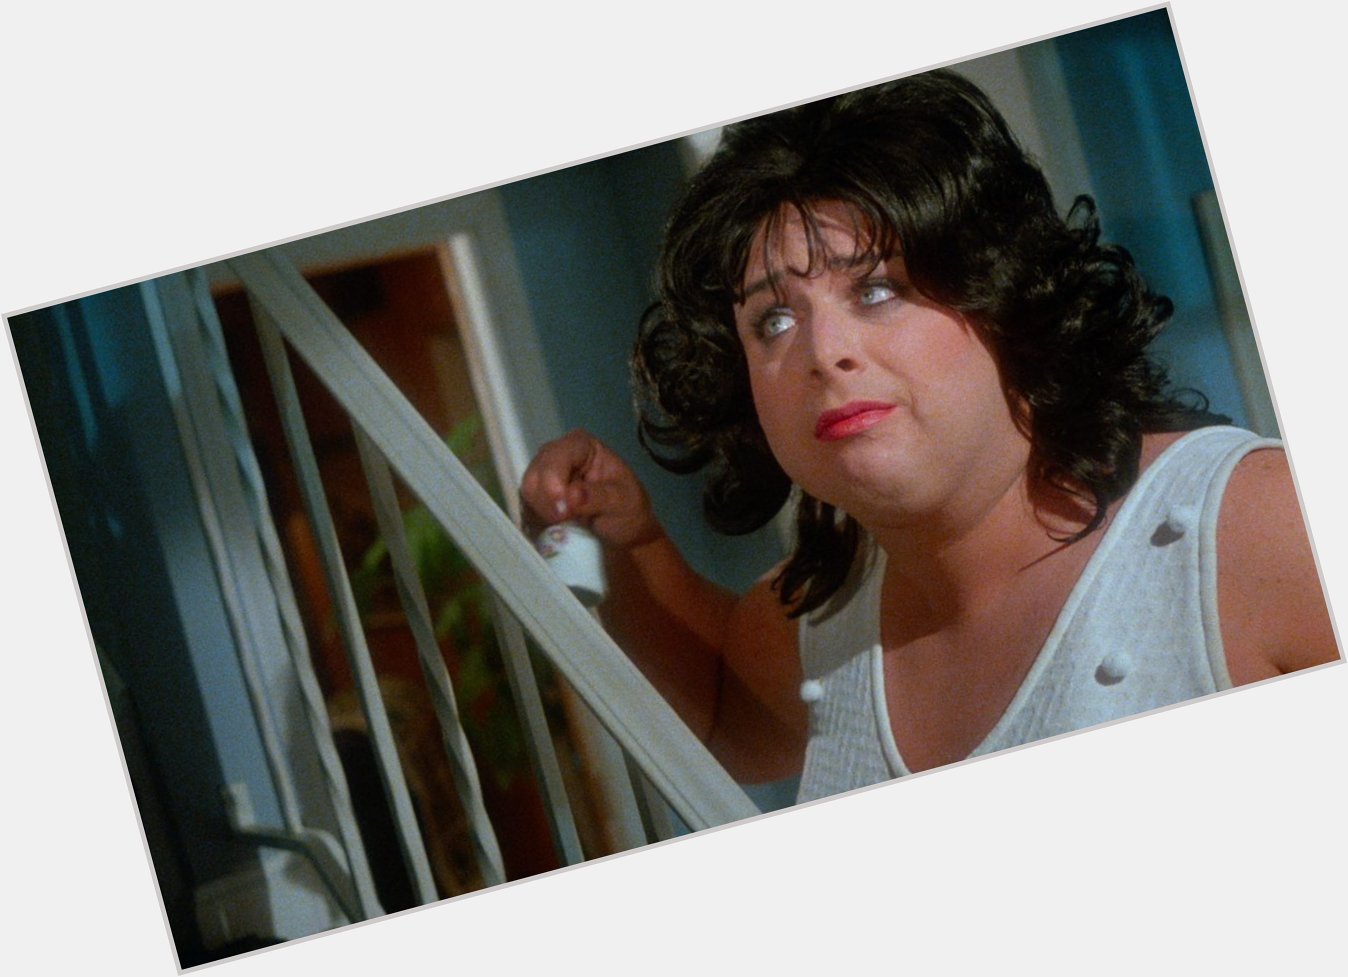 Happy birthday John Waters, favorite director of all time. 
Polyester (1981) first viewing this evening 4.5/5 